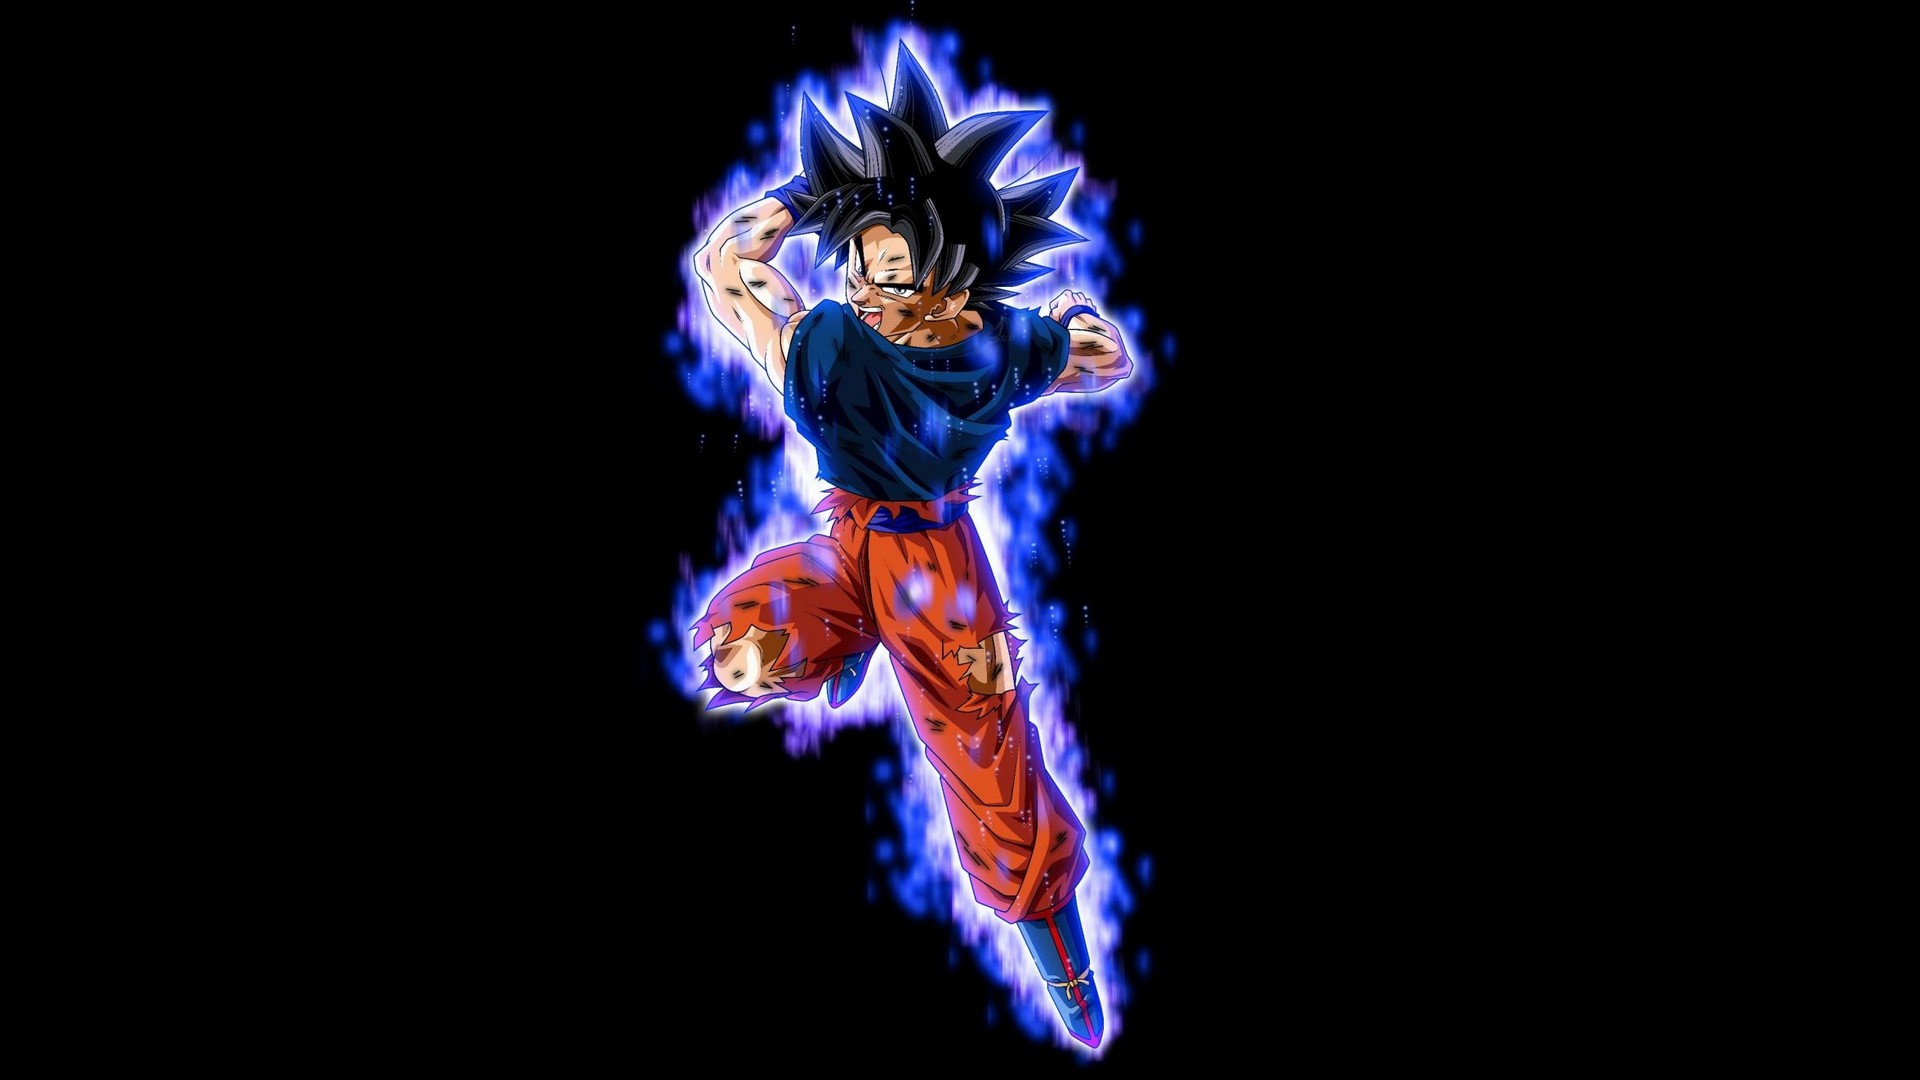 Goku Imagenes Desktop Wallpaper with image resolution 1920x1080 pixel. You can use this wallpaper as background for your desktop Computer Screensavers, Android or iPhone smartphones